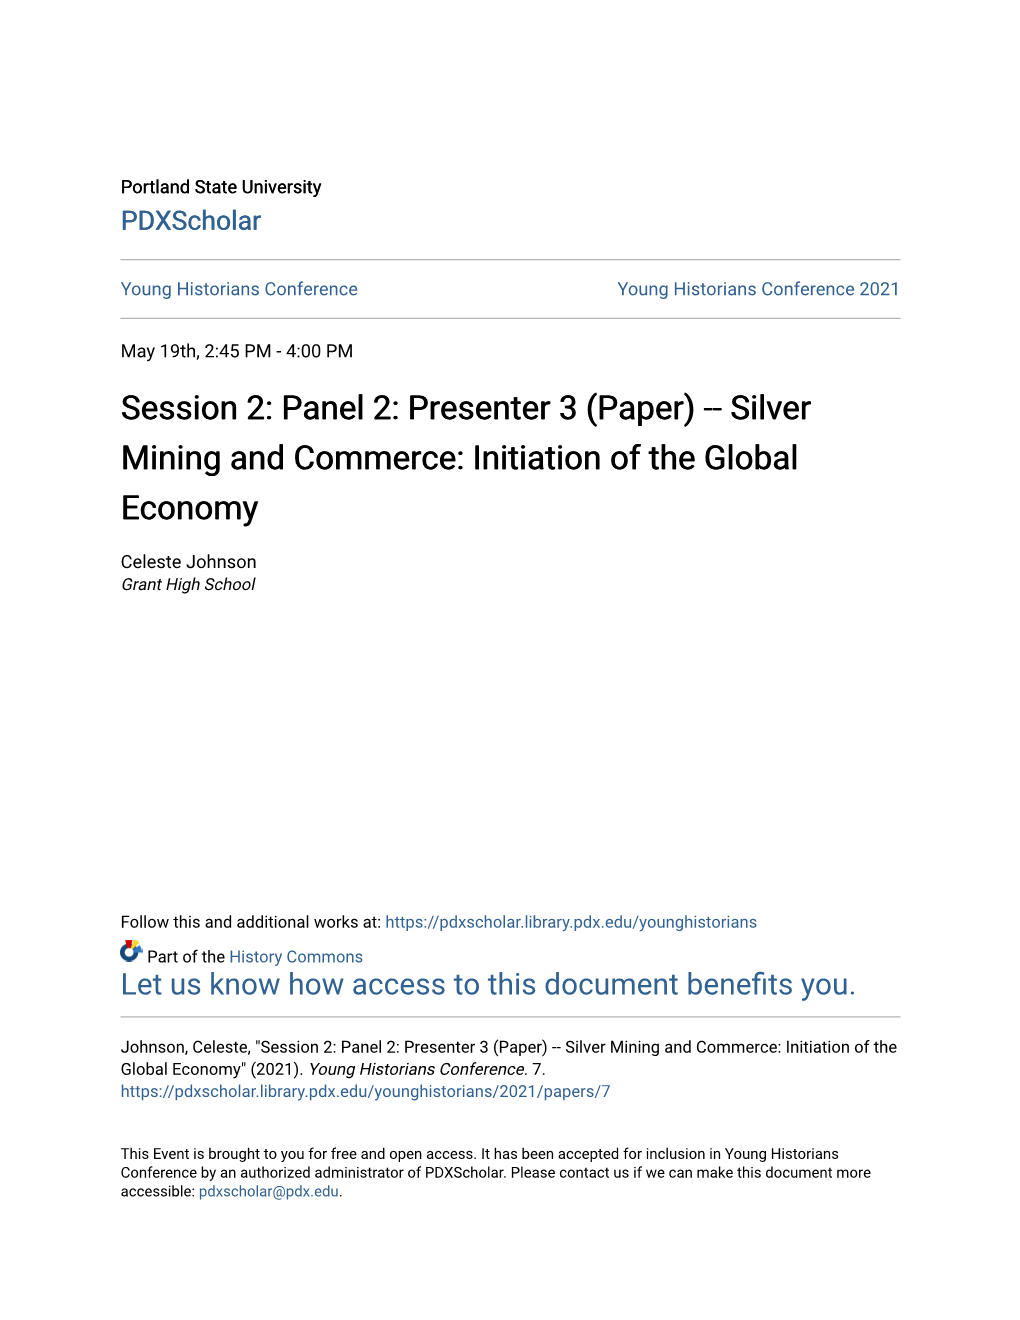 Silver Mining and Commerce: Initiation of the Global Economy